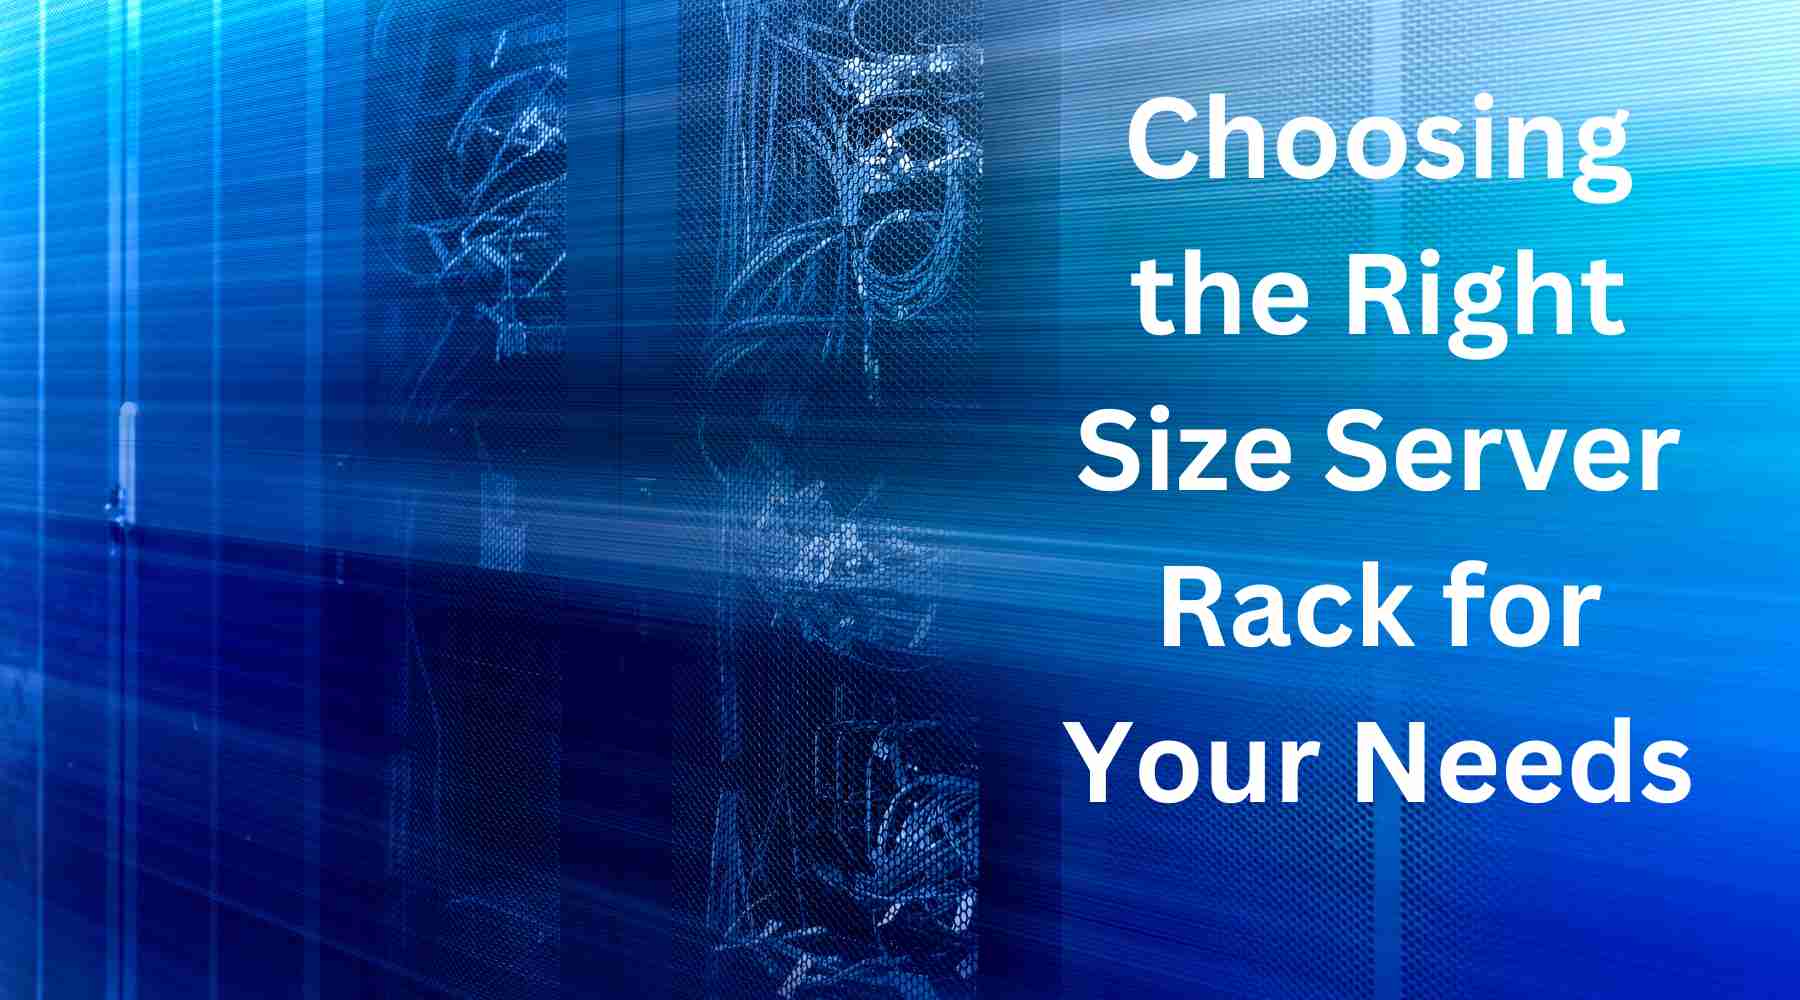 Blog posts Choosing the Right Size Server Rack for Your Needs